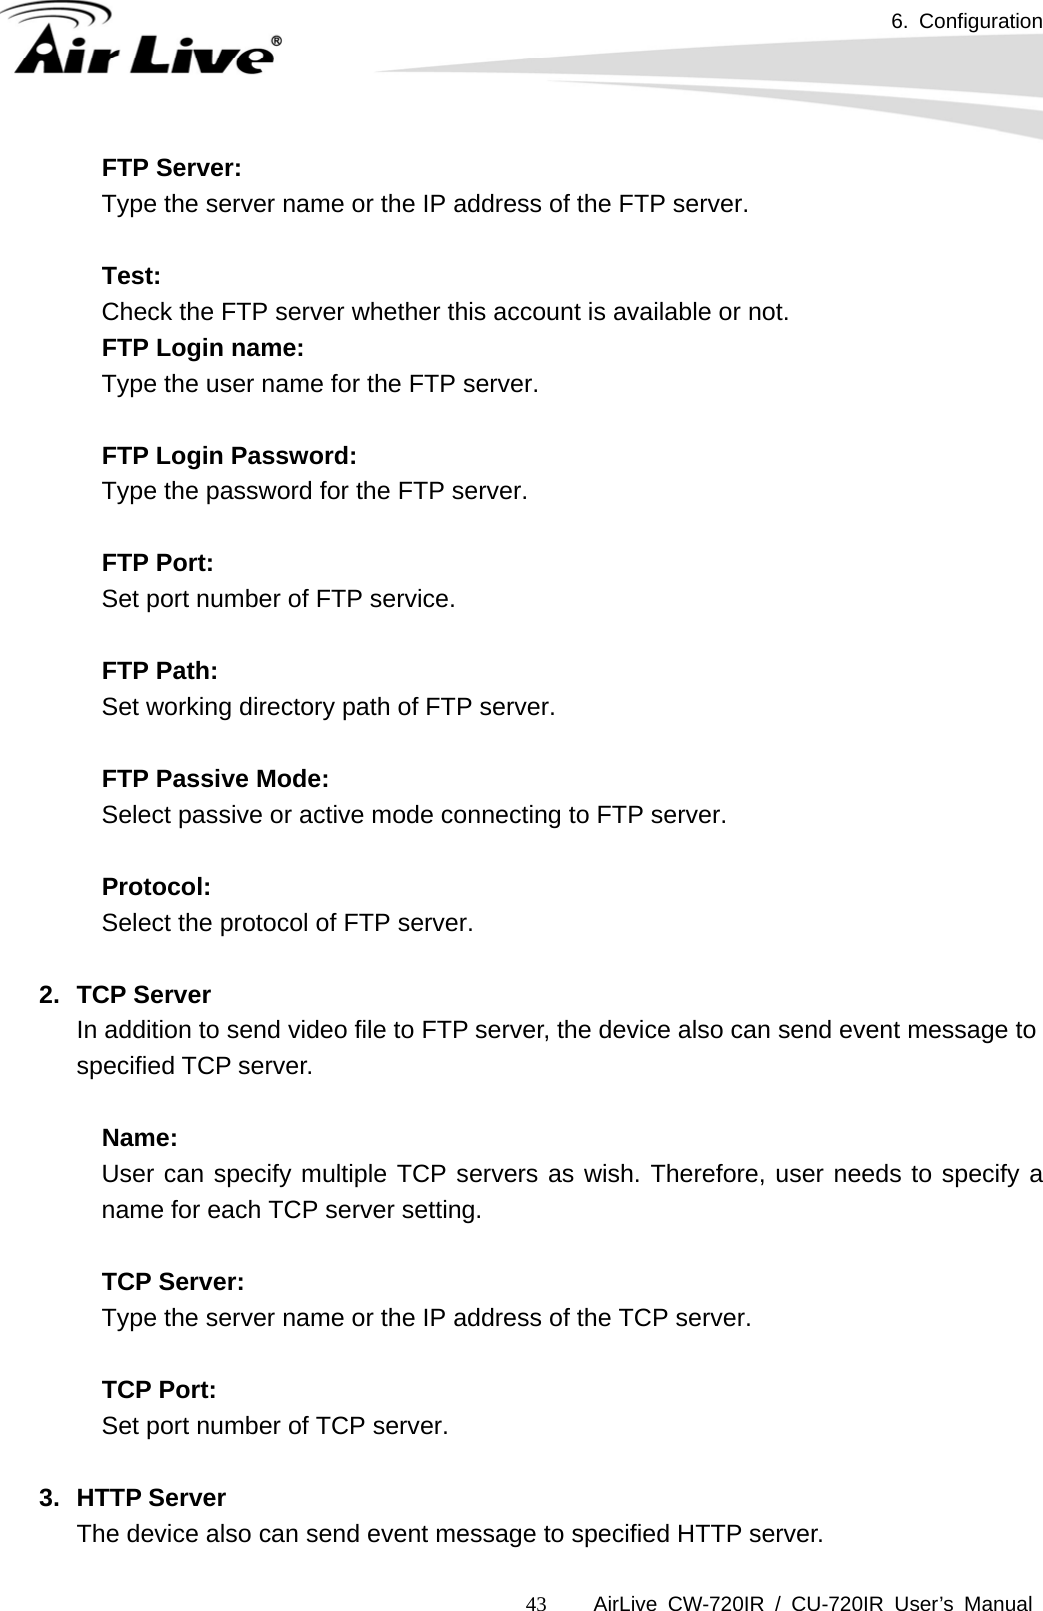 6. Configuration      AirLive CW-720IR / CU-720IR User’s Manual 43FTP Server:   Type the server name or the IP address of the FTP server.    Test:  Check the FTP server whether this account is available or not.   FTP Login name:  Type the user name for the FTP server.    FTP Login Password:  Type the password for the FTP server.    FTP Port:  Set port number of FTP service.    FTP Path:  Set working directory path of FTP server.    FTP Passive Mode:  Select passive or active mode connecting to FTP server.    Protocol: Select the protocol of FTP server.  2. TCP Server In addition to send video file to FTP server, the device also can send event message to specified TCP server.  Name:   User can specify multiple TCP servers as wish. Therefore, user needs to specify a name for each TCP server setting.    TCP Server:   Type the server name or the IP address of the TCP server.     TCP Port:  Set port number of TCP server.    3. HTTP Server The device also can send event message to specified HTTP server. 